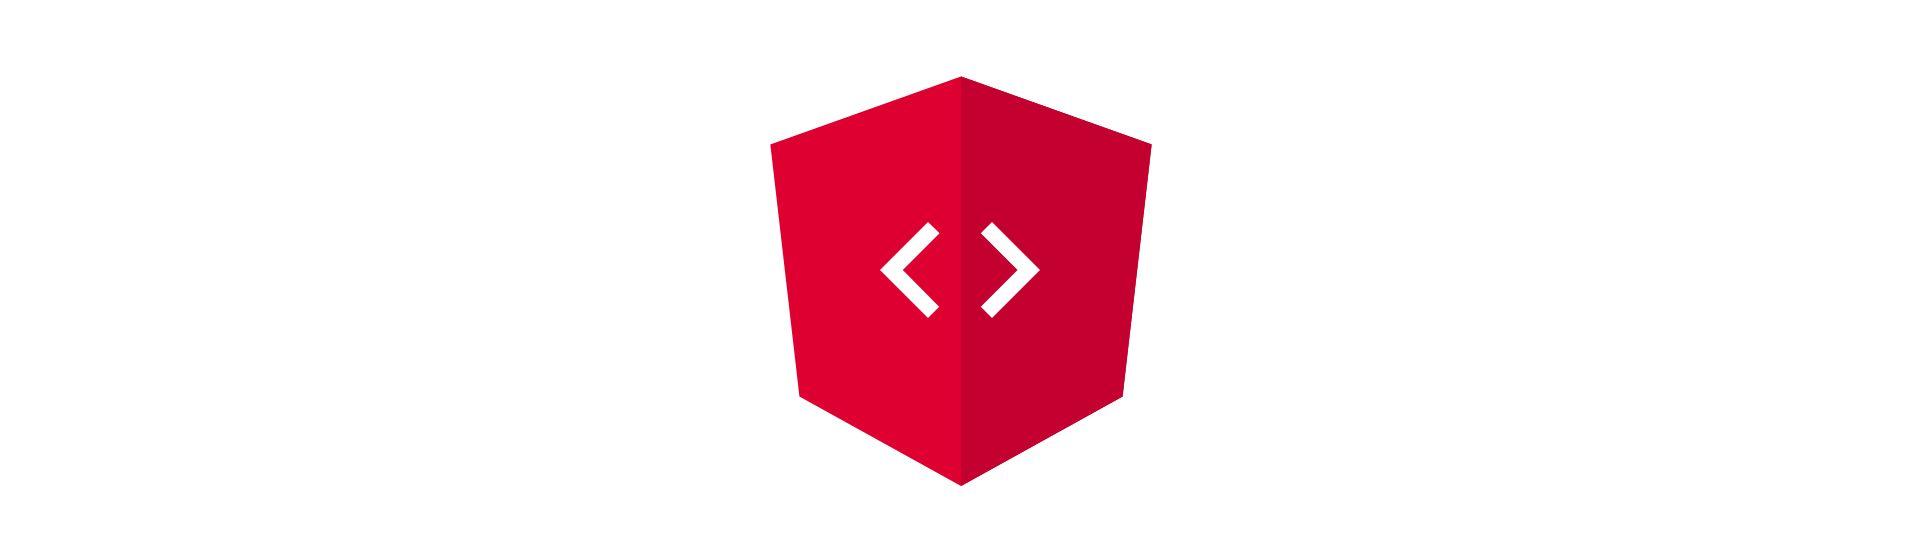 Red Angular Logo - Angular Top 50: What you should have read in 2017 | malcoded